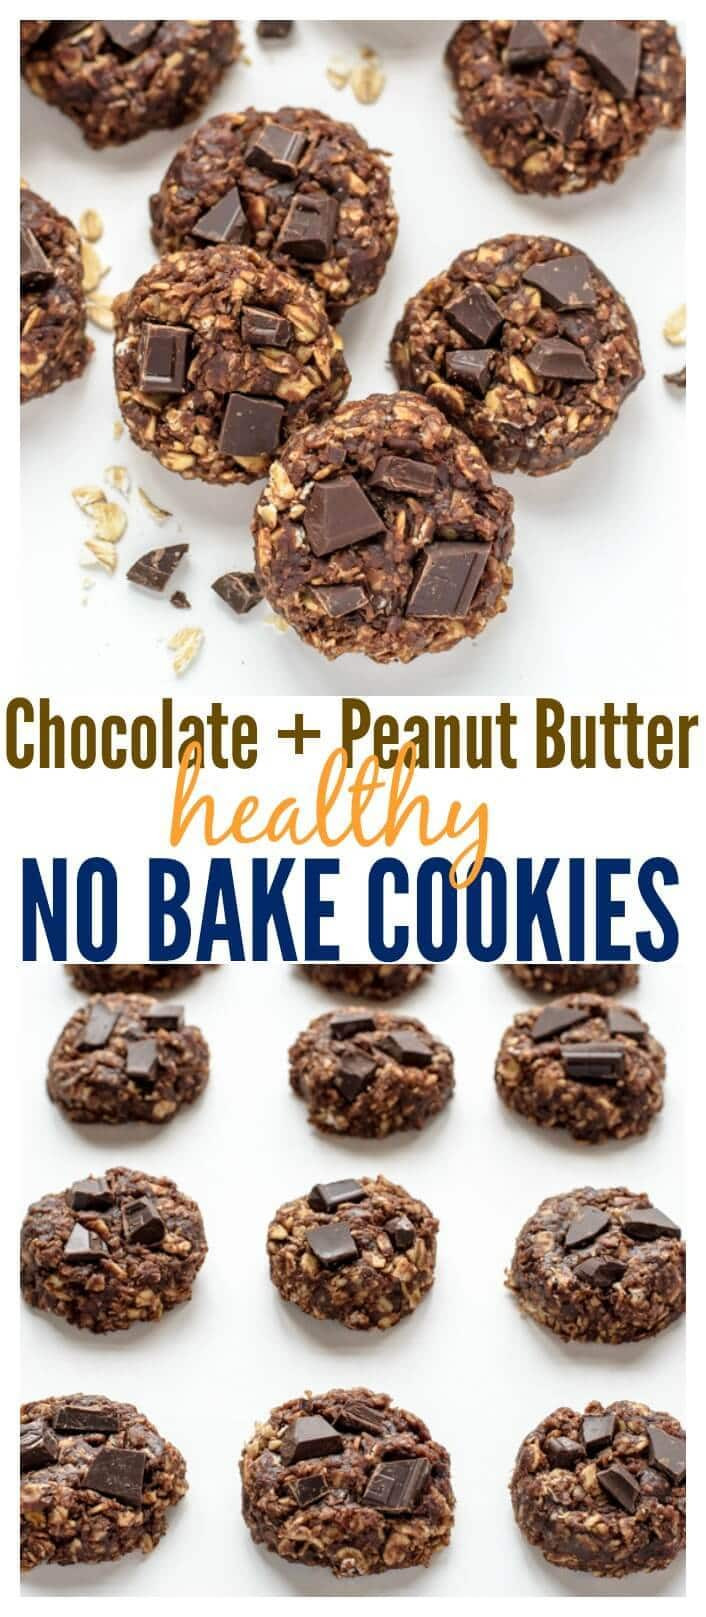 Chocolate No Bake Cookies Without Peanut Butter
 Healthy No Bake Cookies with Chocolate and Peanut Butter